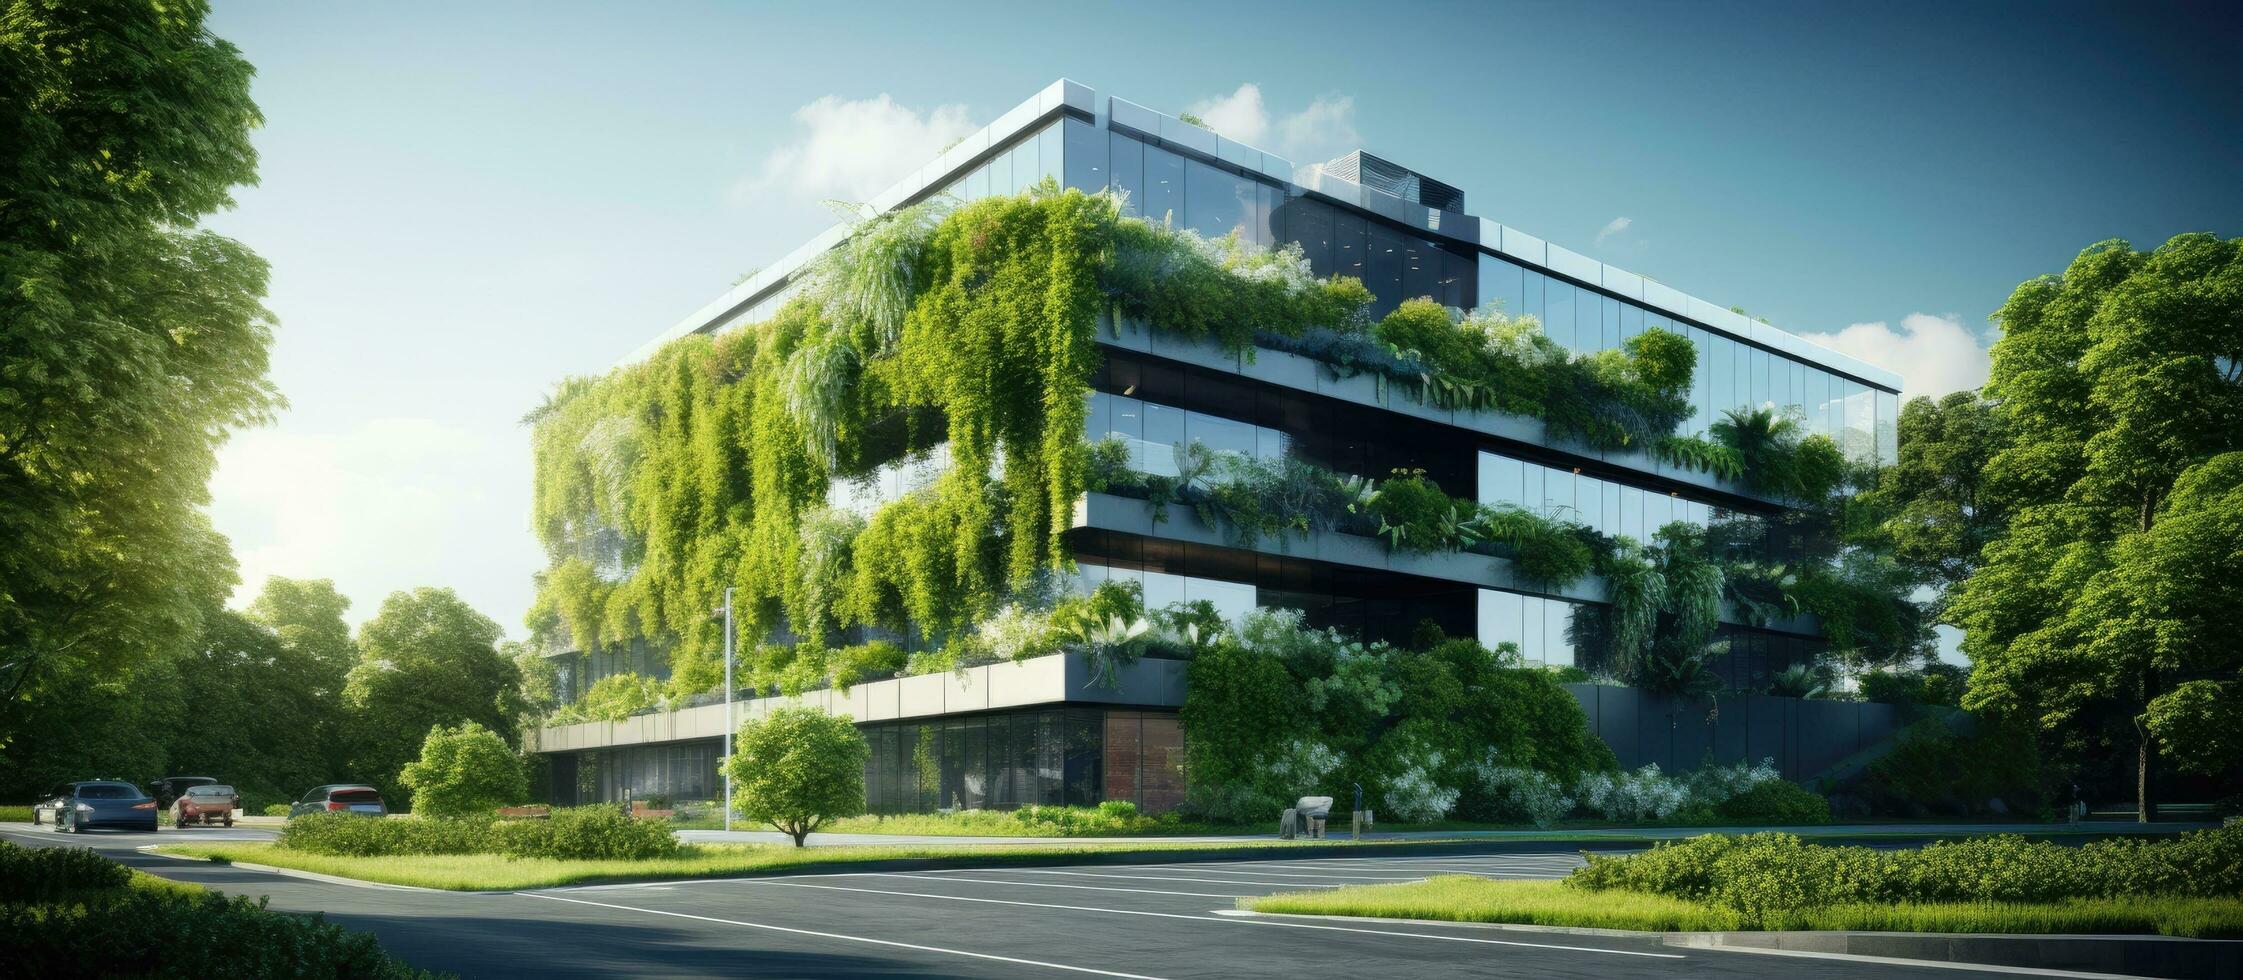 Modern office building with lush greenery photo